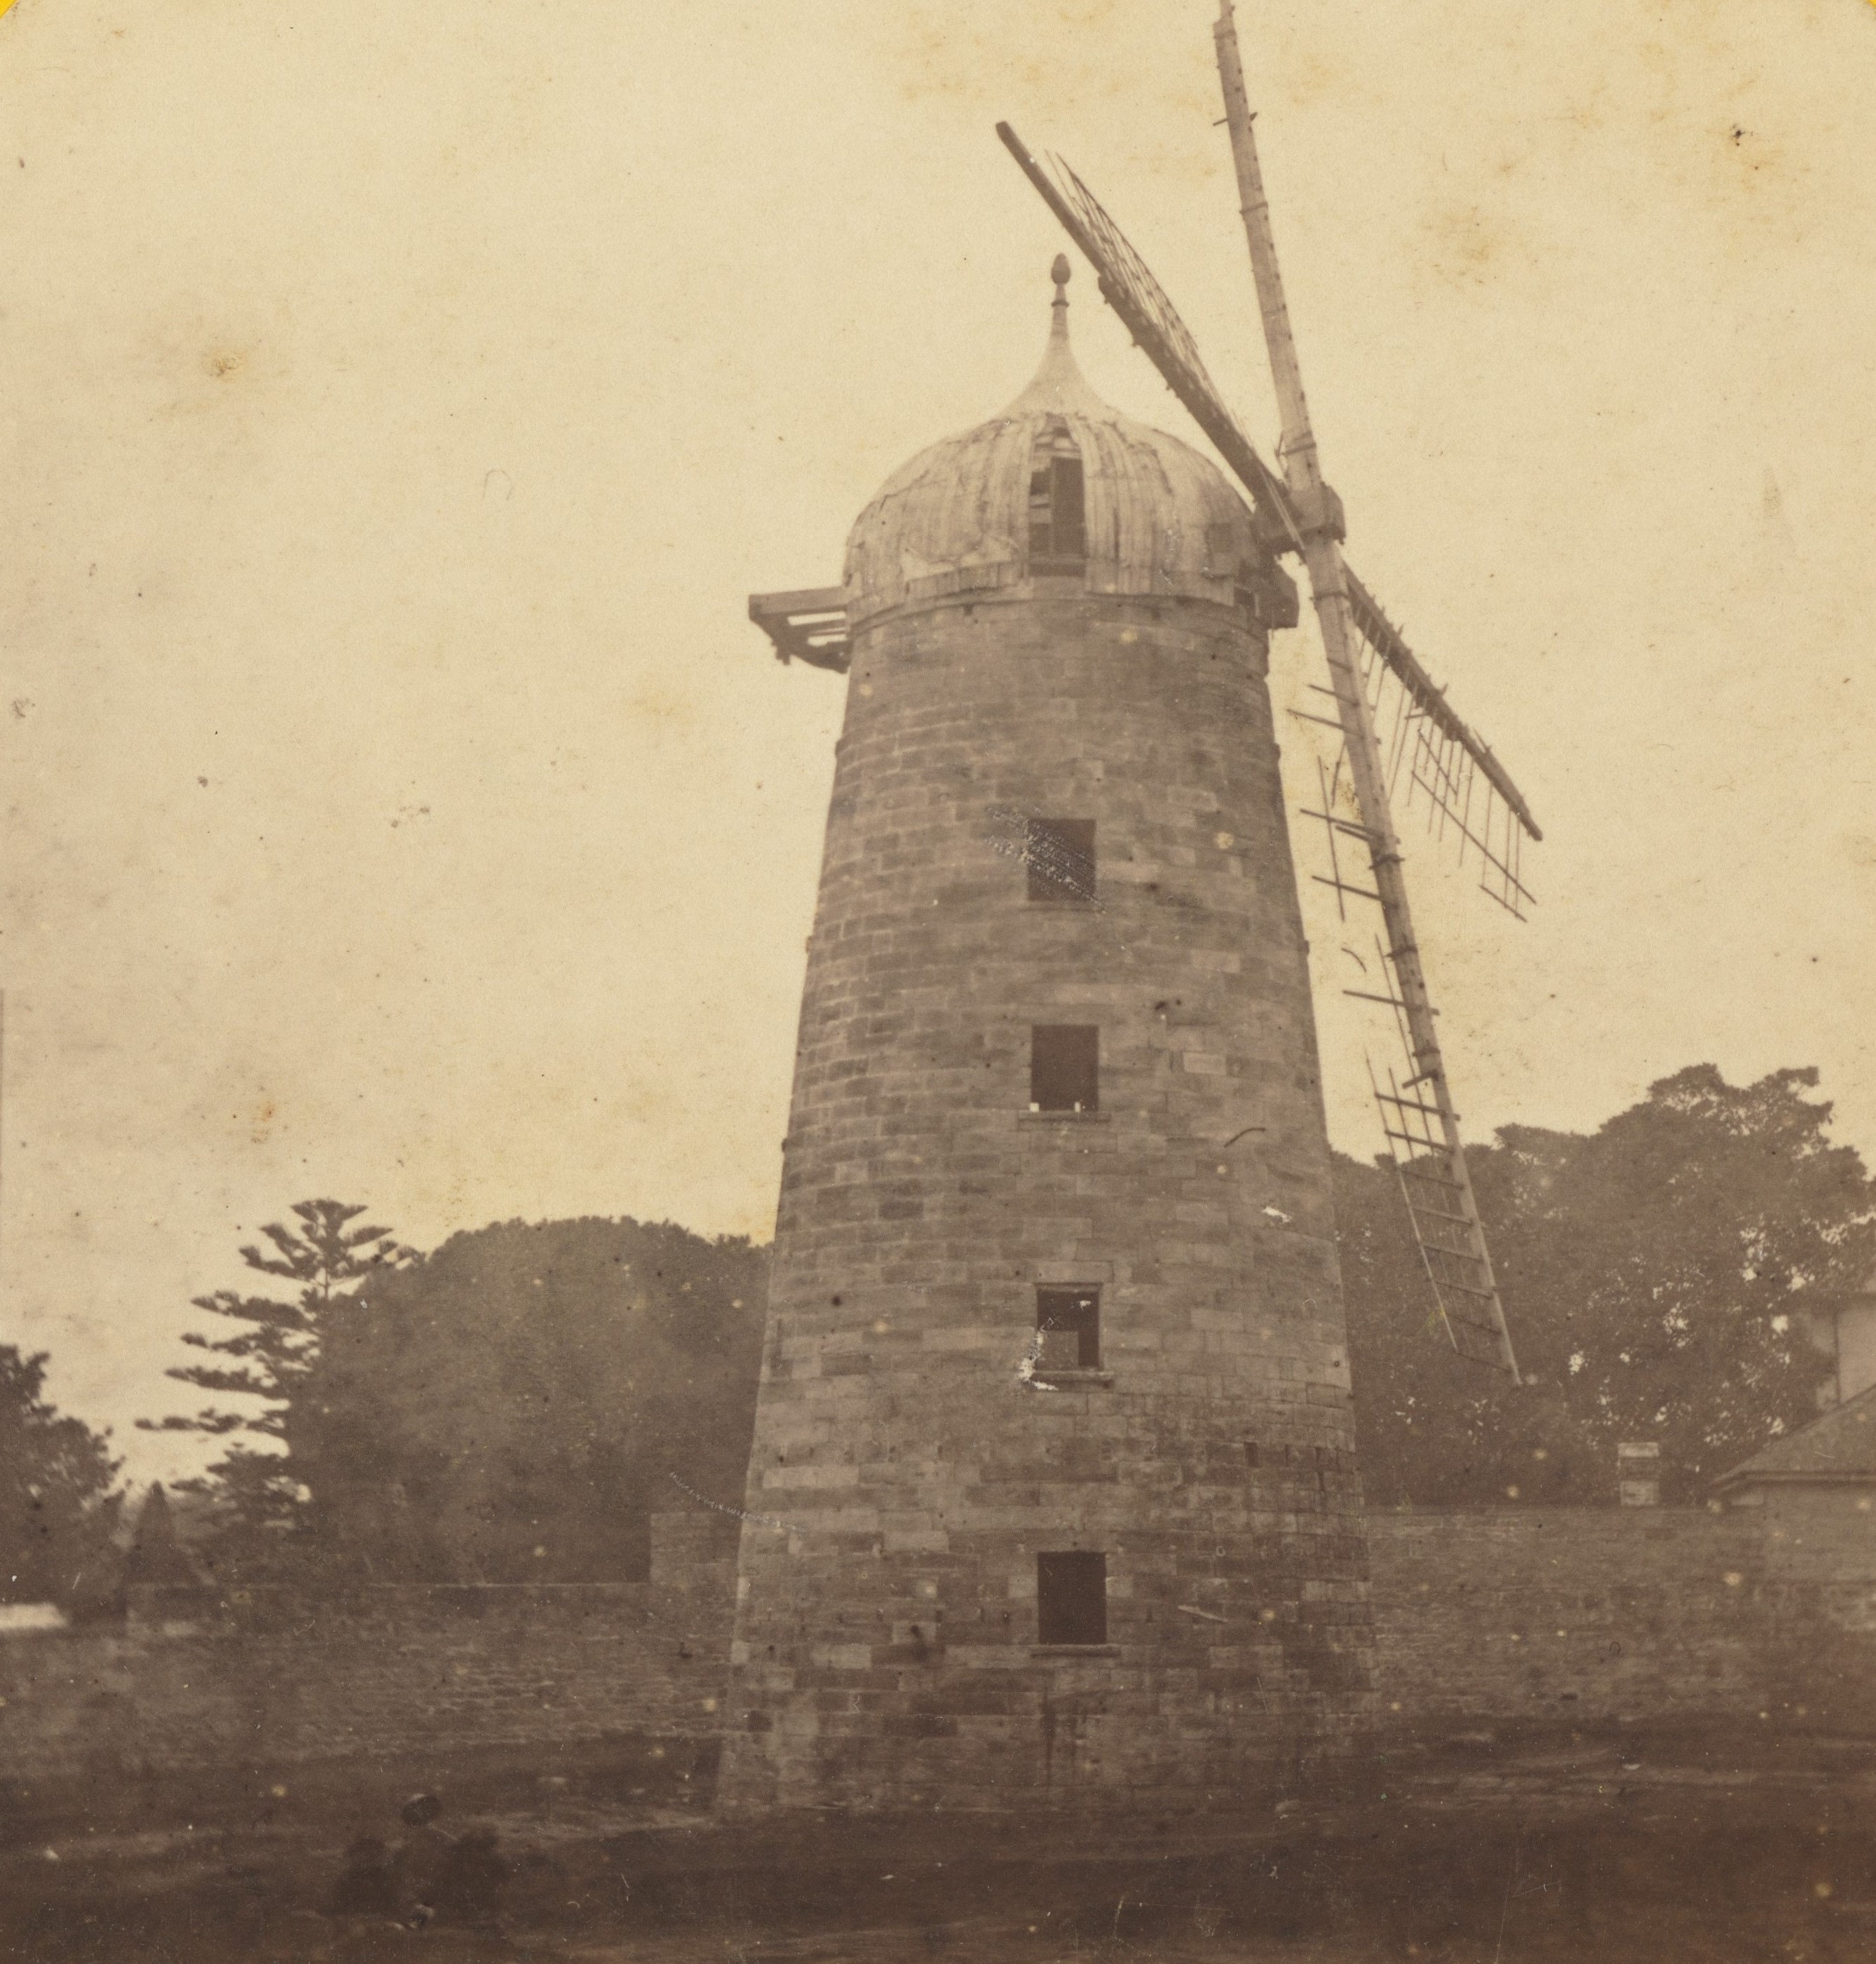 Photograph showing an old windmill